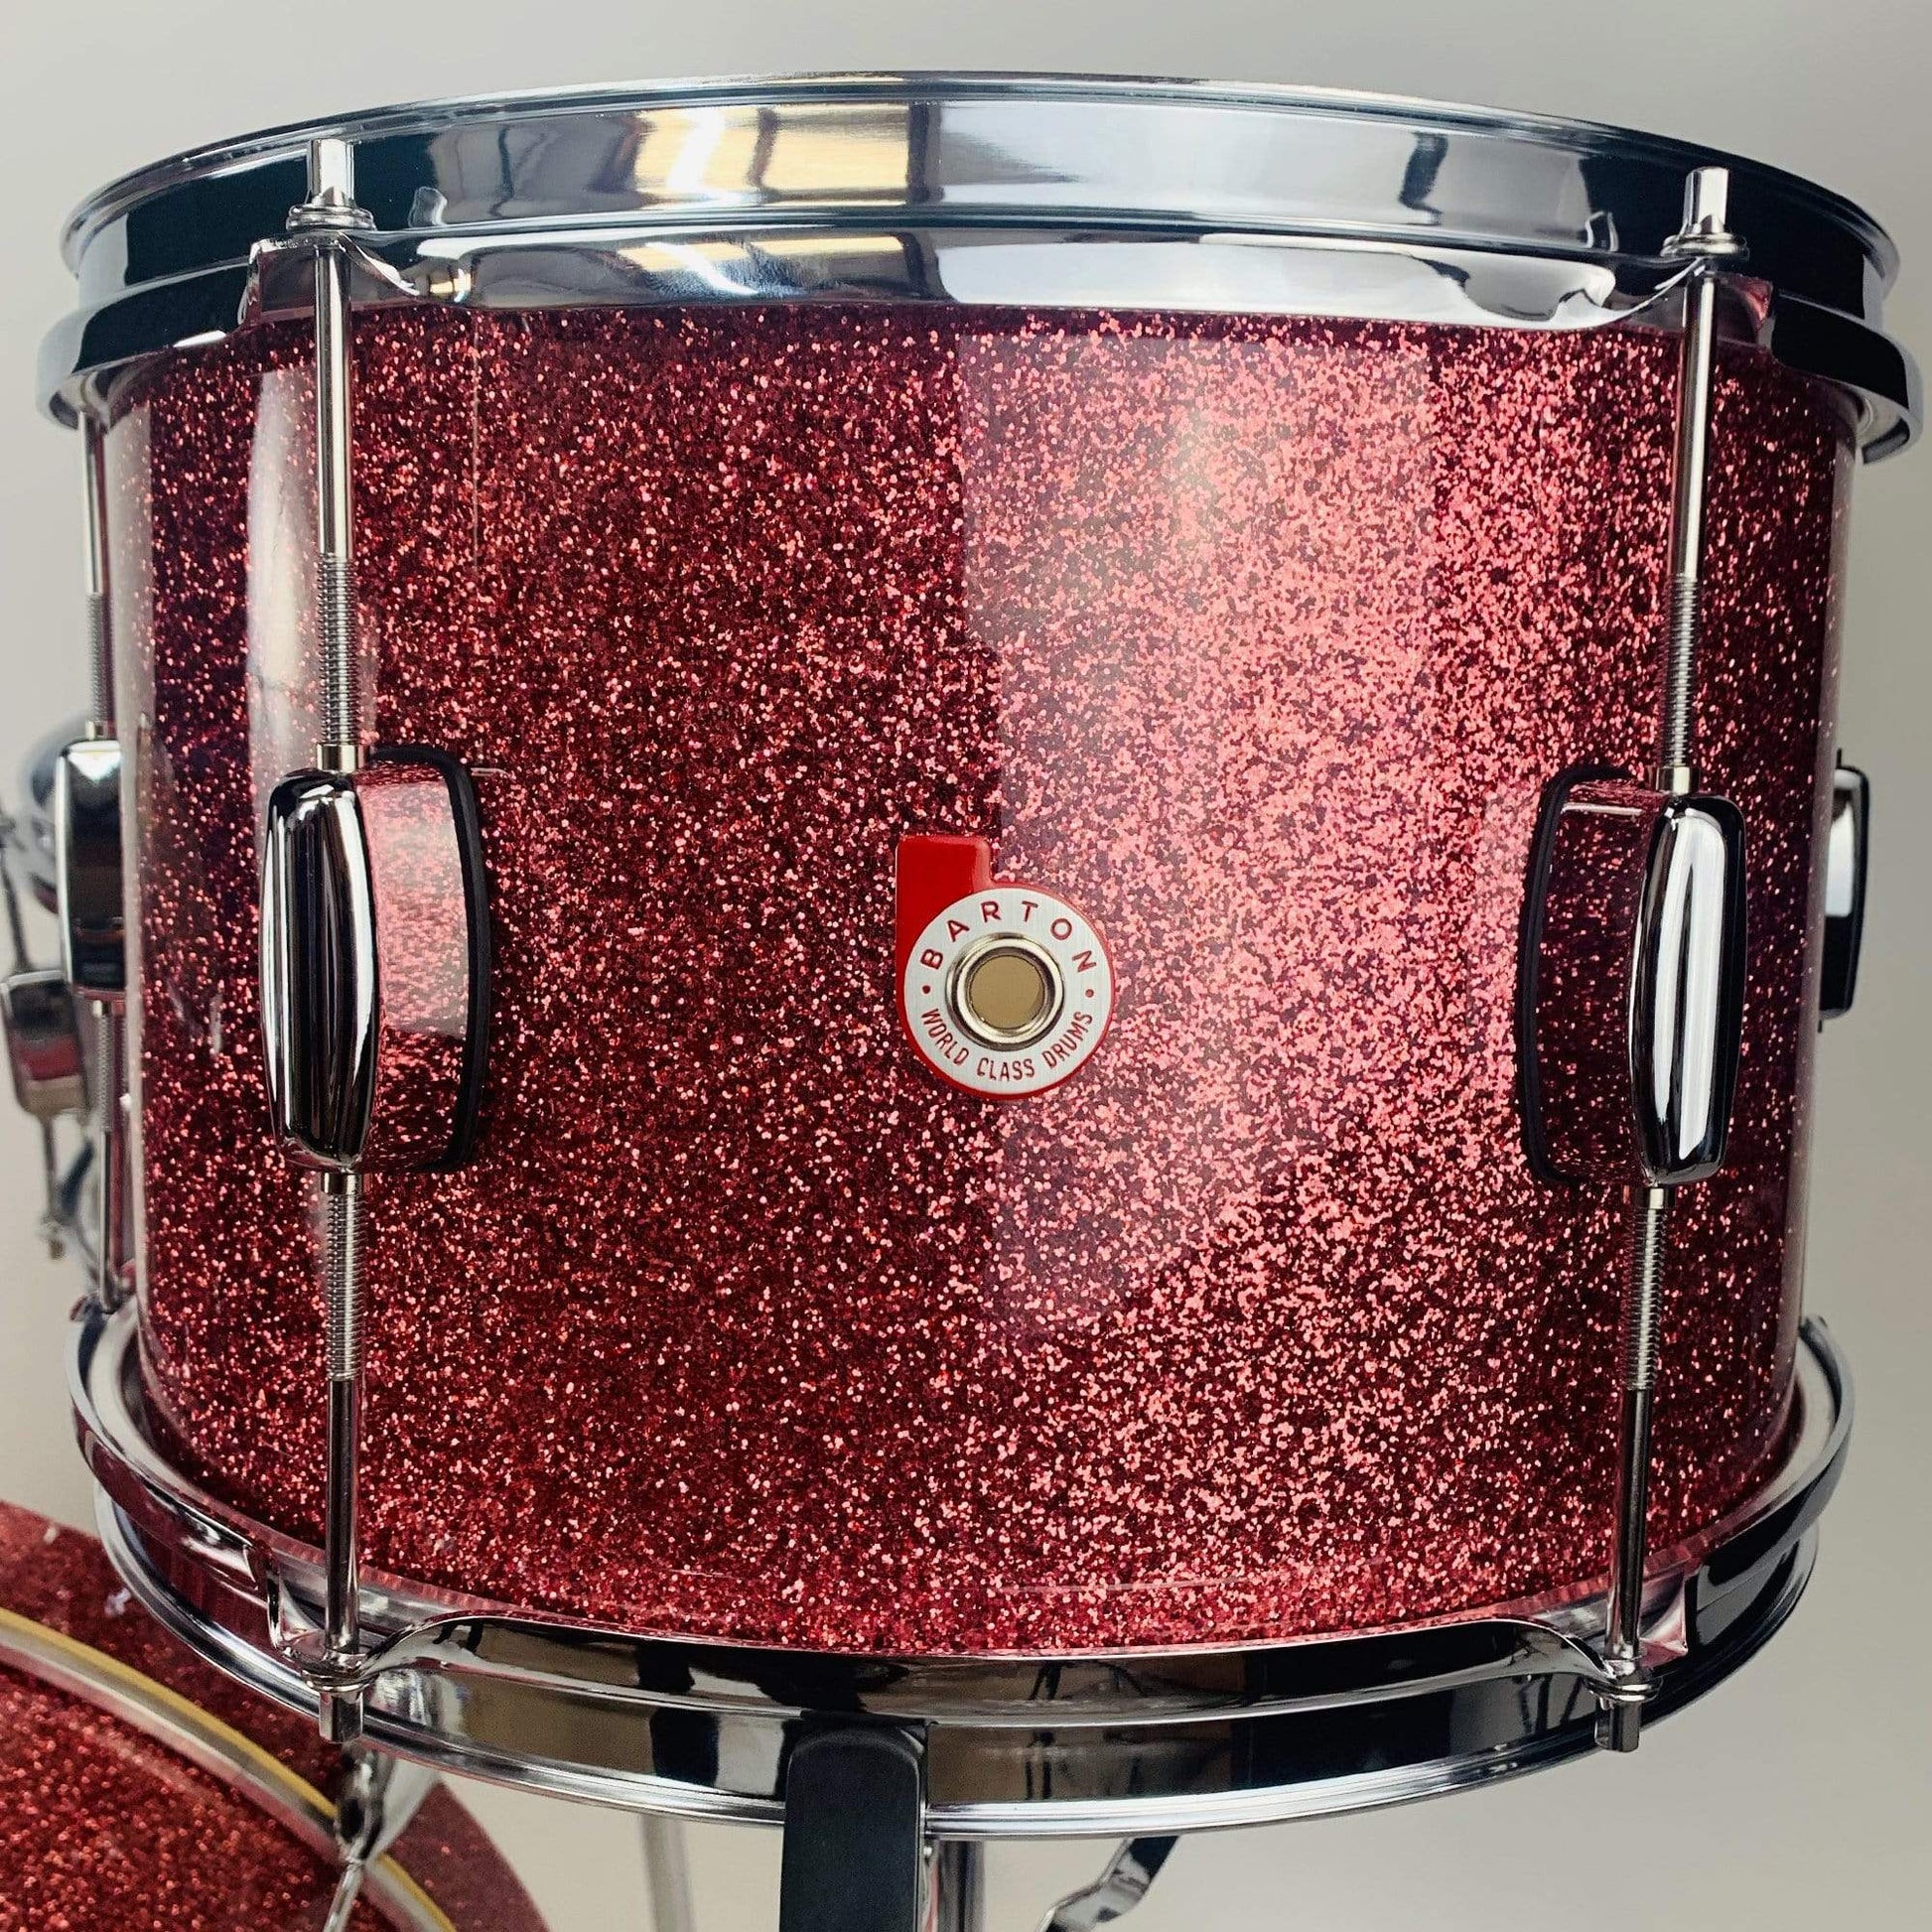 Barton Drum Co. 13/16/22 3pc. Essential Maple Drum Kit Pink Sparkle Drums and Percussion / Acoustic Drums / Full Acoustic Kits